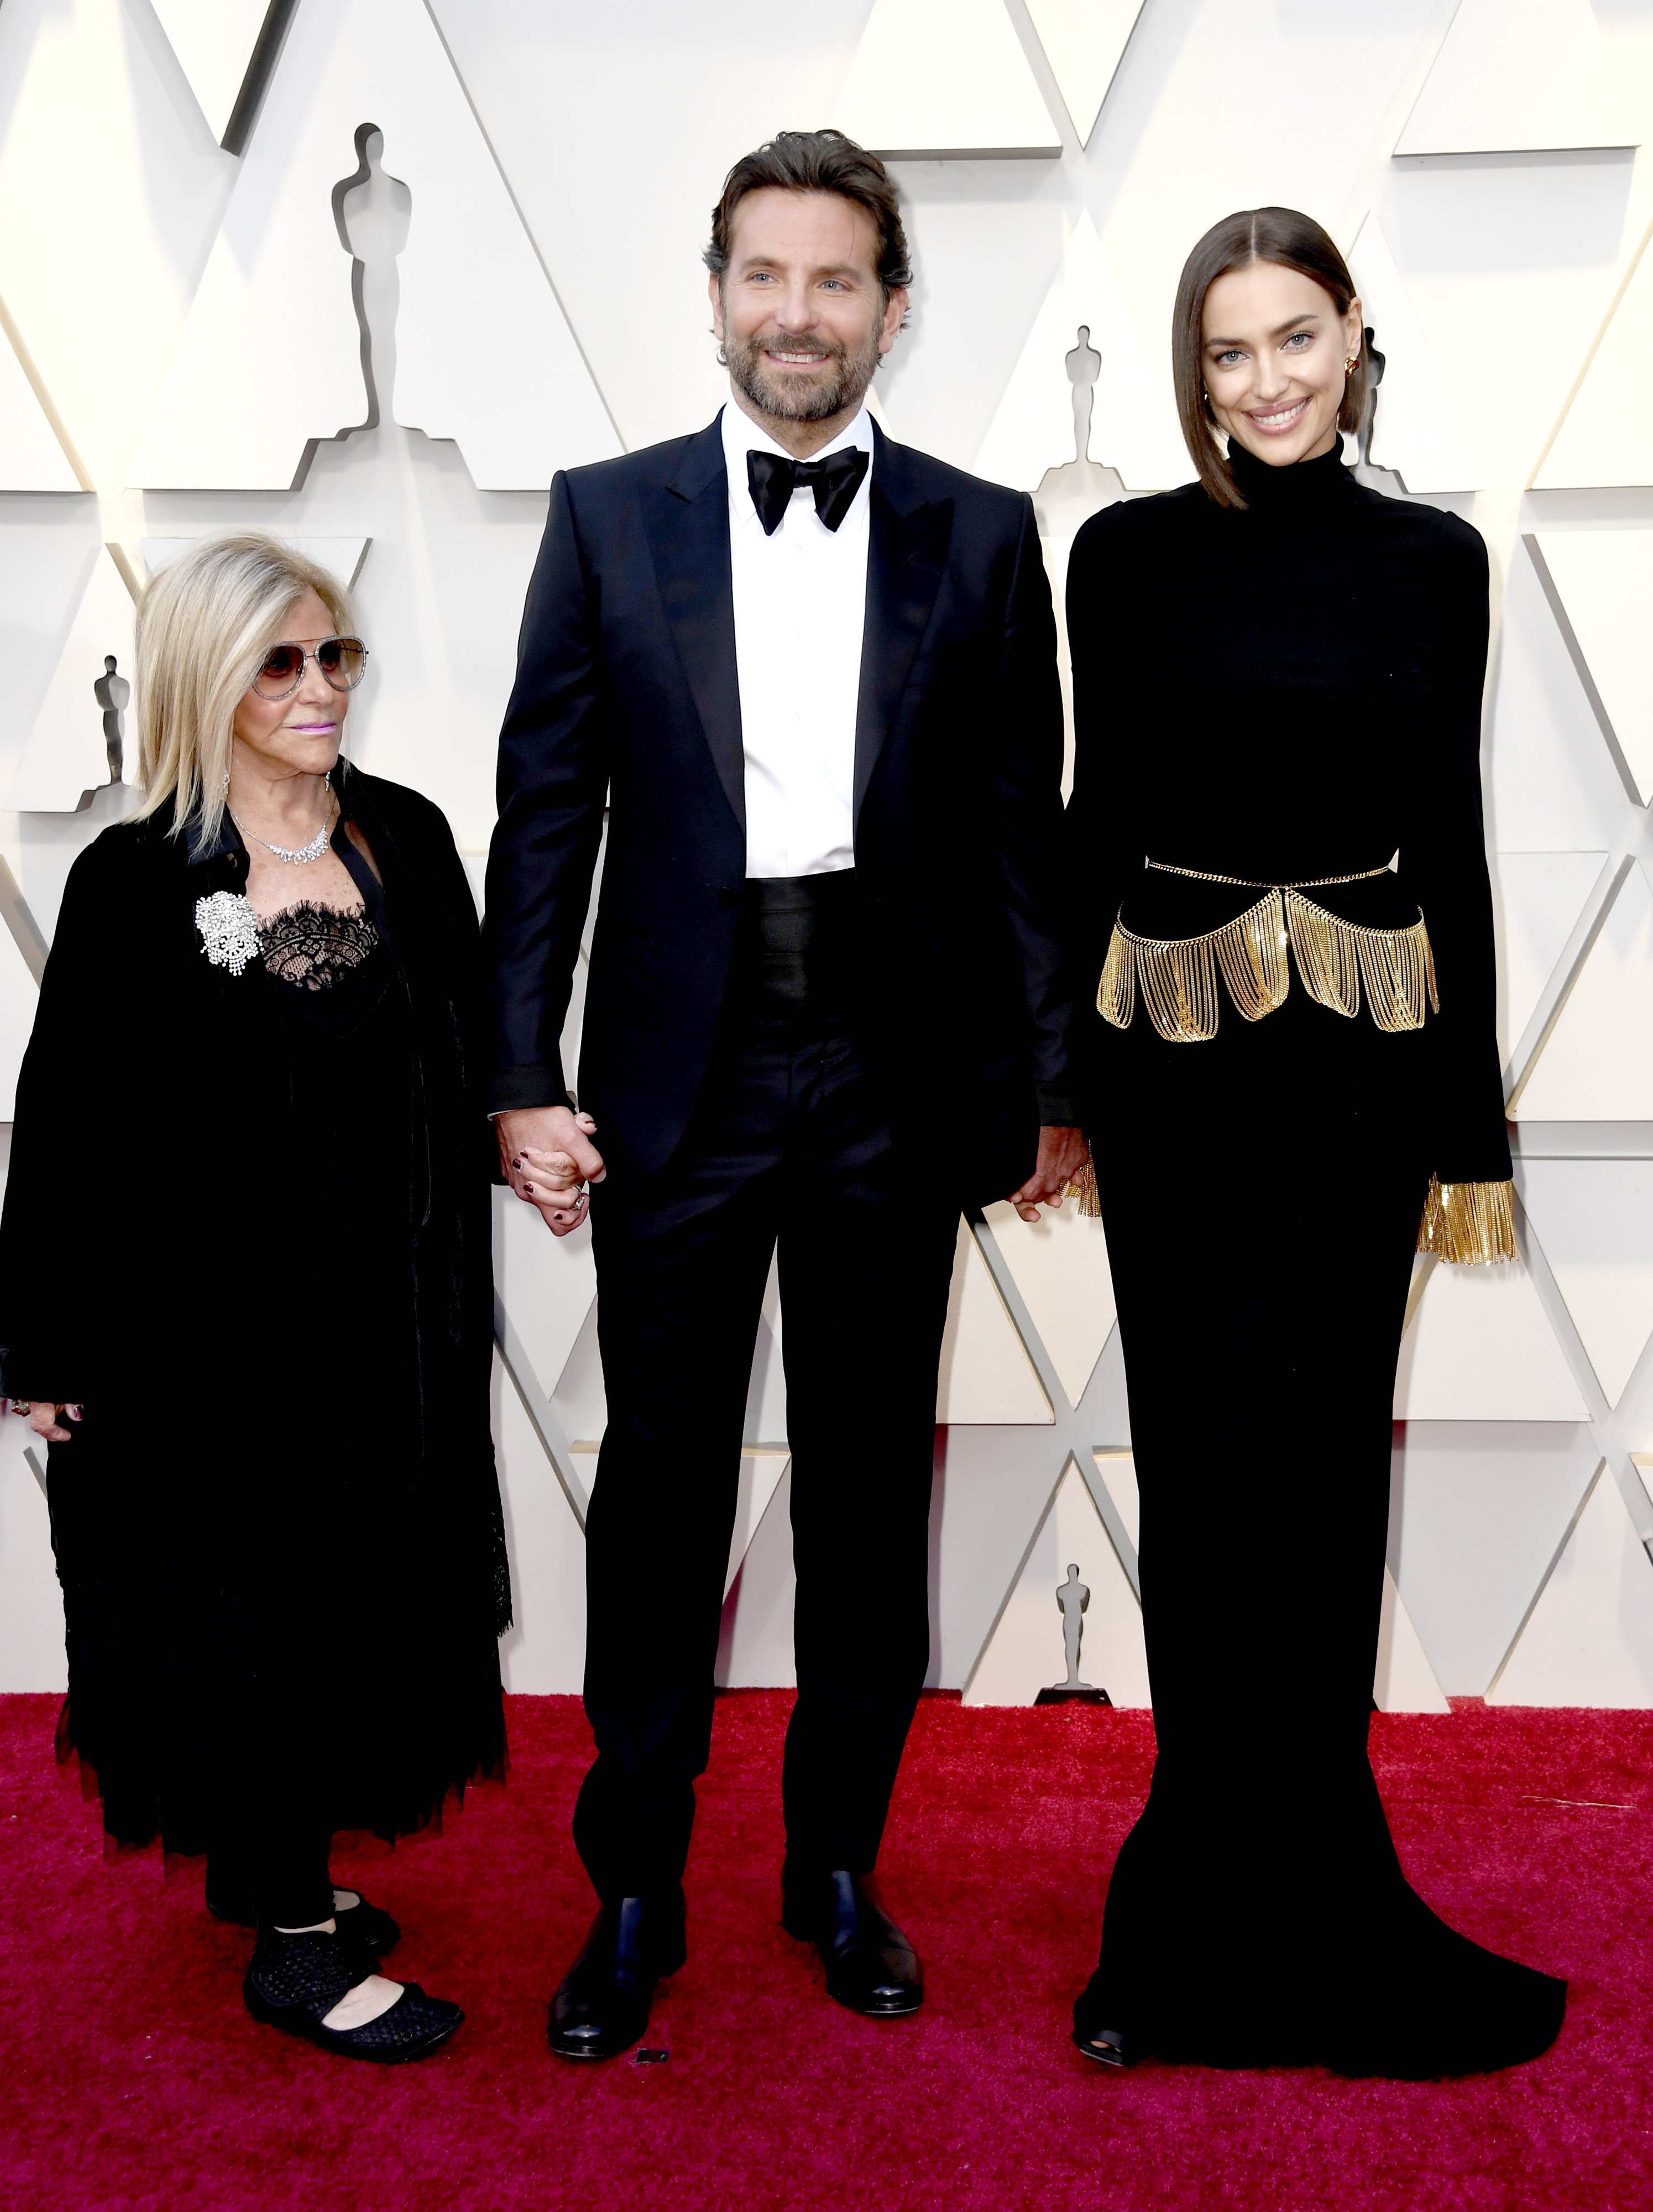 Gloria Campano, Bradley Cooper and Irina Shayk at the 91st Annual Academy Awards at Hollywood and Highland on February 24, 2019 in Hollywood, California. | Source: Getty Images